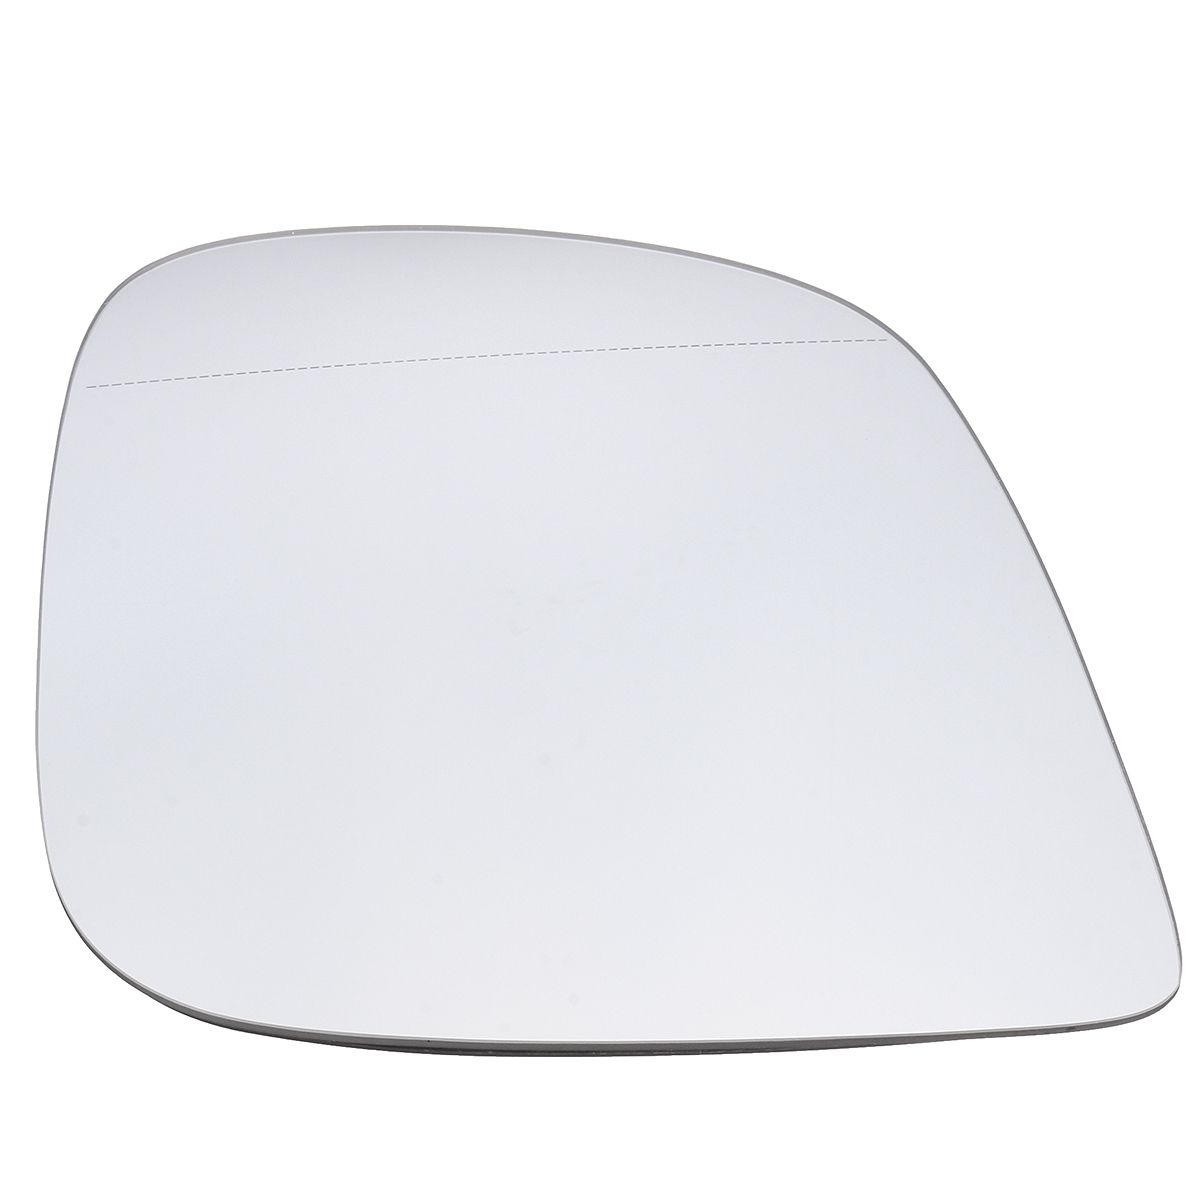 Car-Left-Driver-Side-Heated-Door-Rear-View-Mirror-Glass-For-AUDI-Q5-09-17-Q7-10-15-1176585